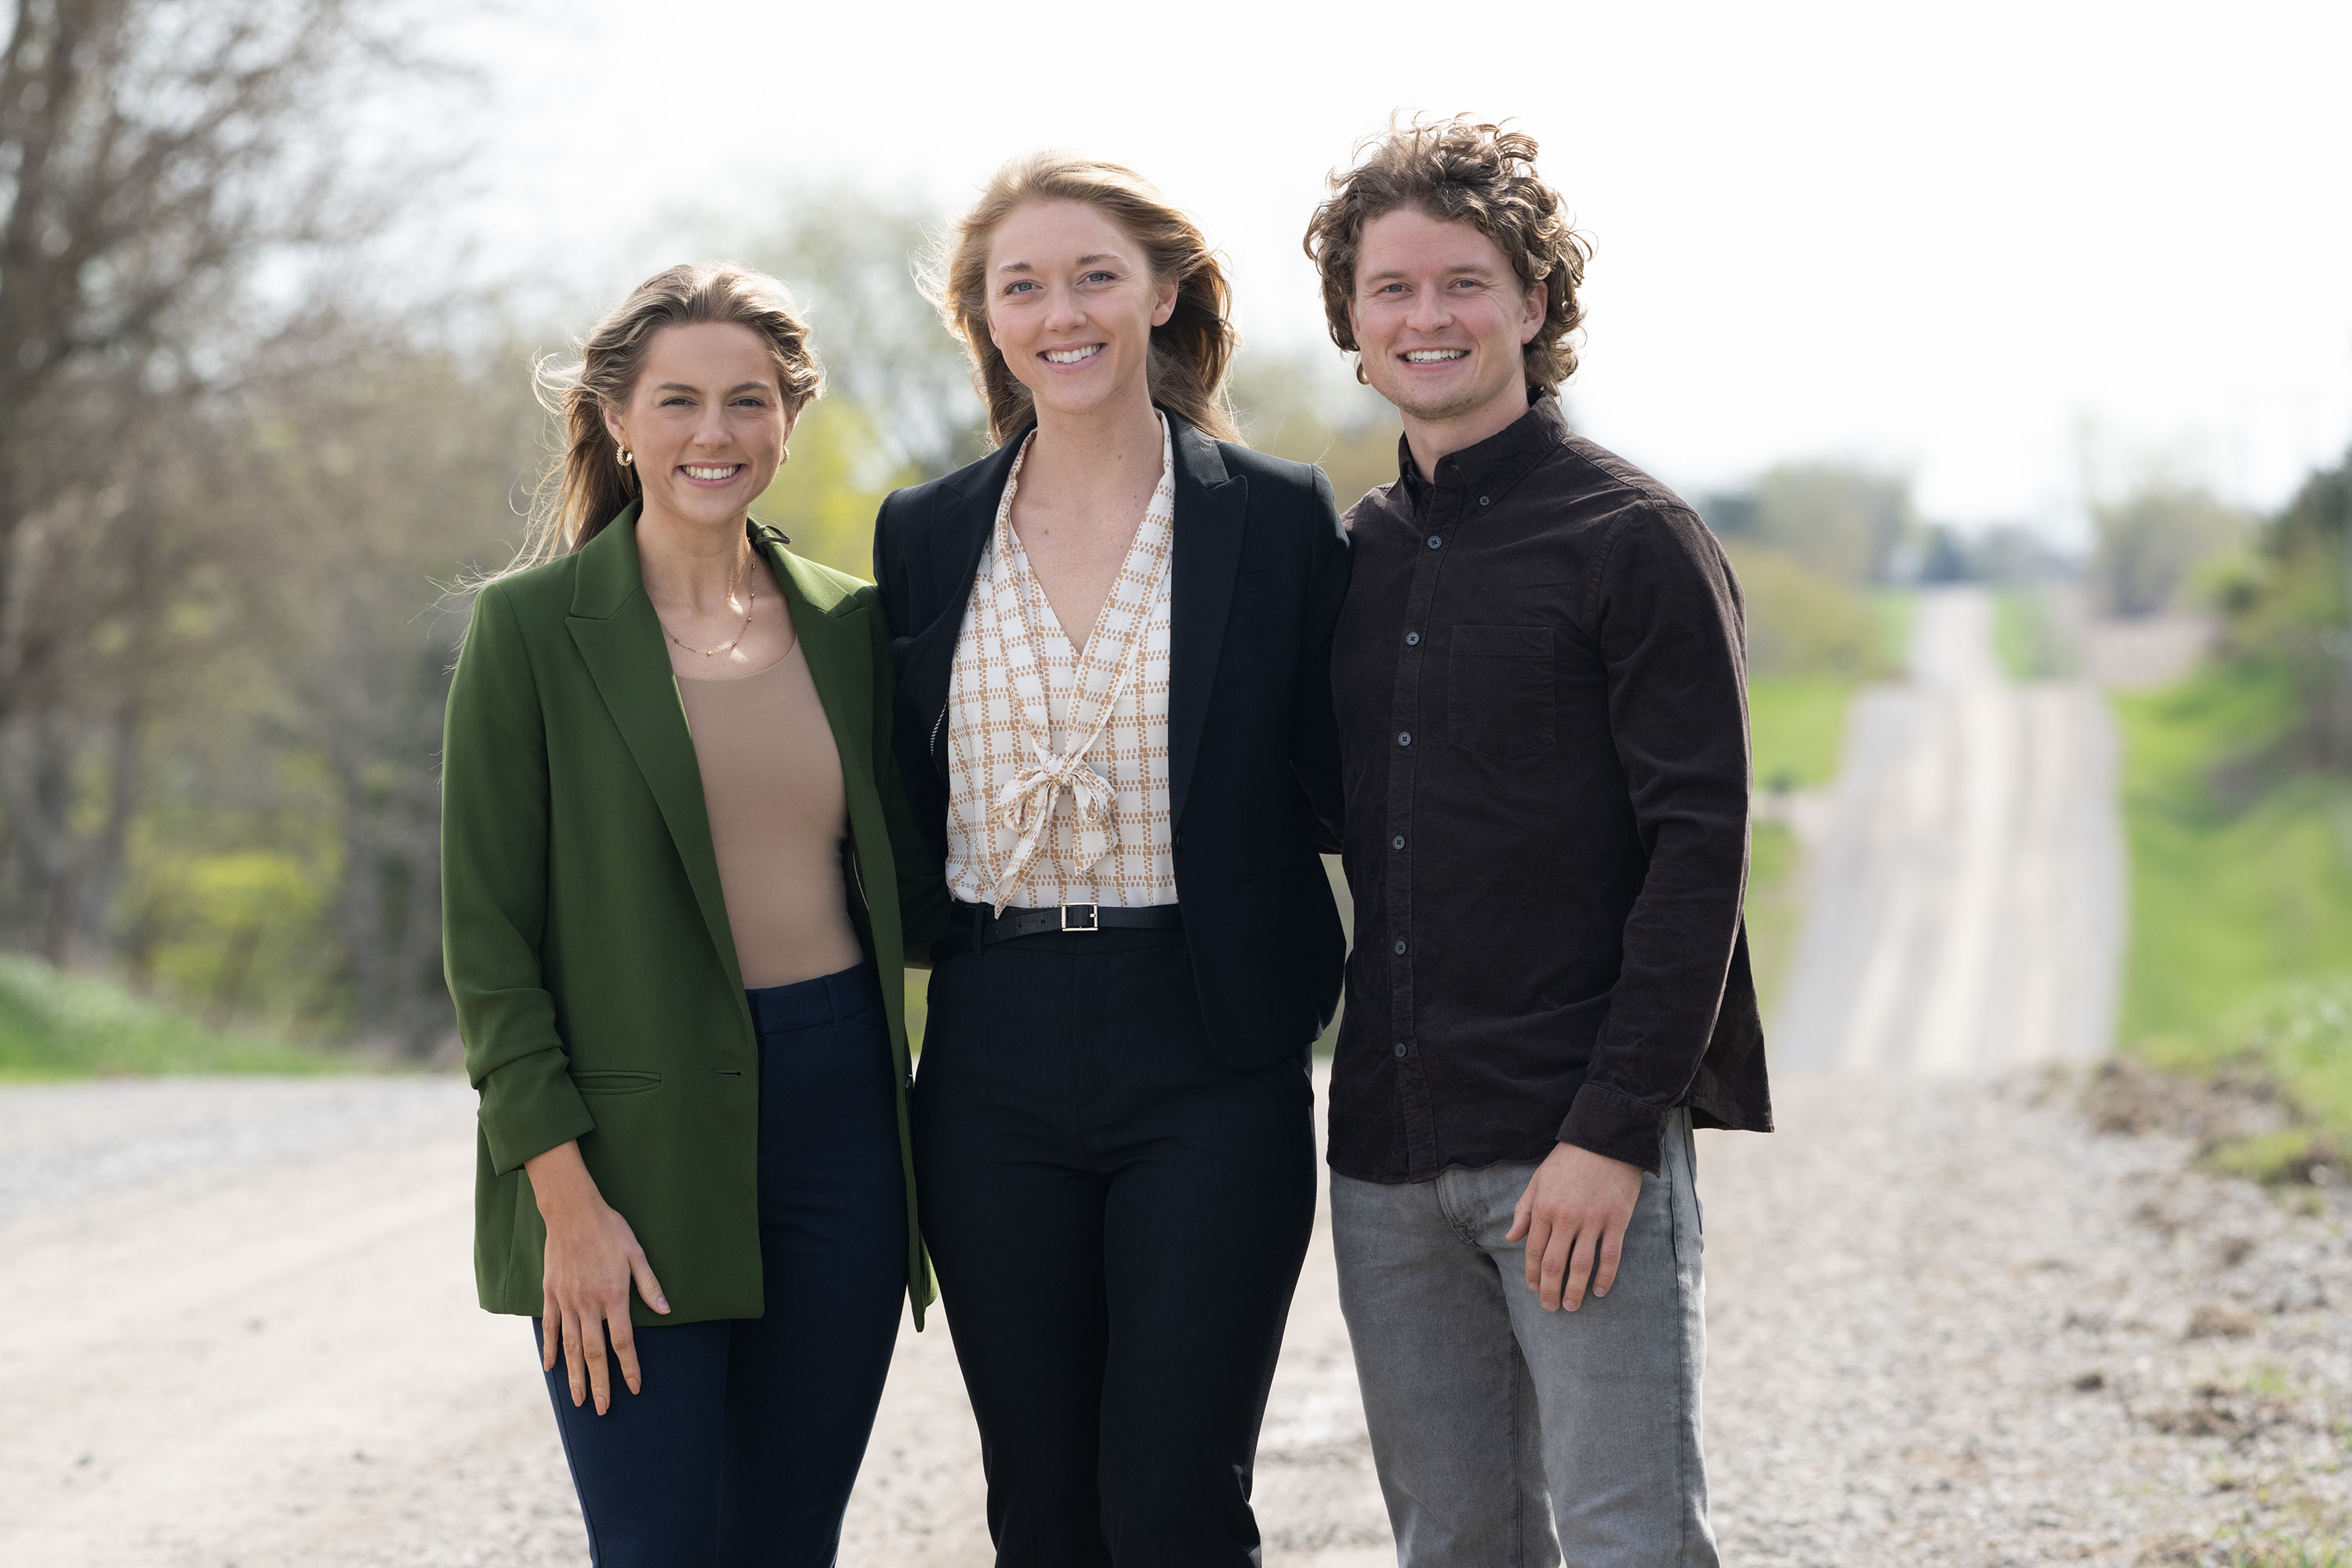 Jenah McCarty (green jacket), Hallie Vonk, and Nicholas Lembezeder are all graduating from the College of Public Health this spring. They helped found the Student Association for Rural Health.